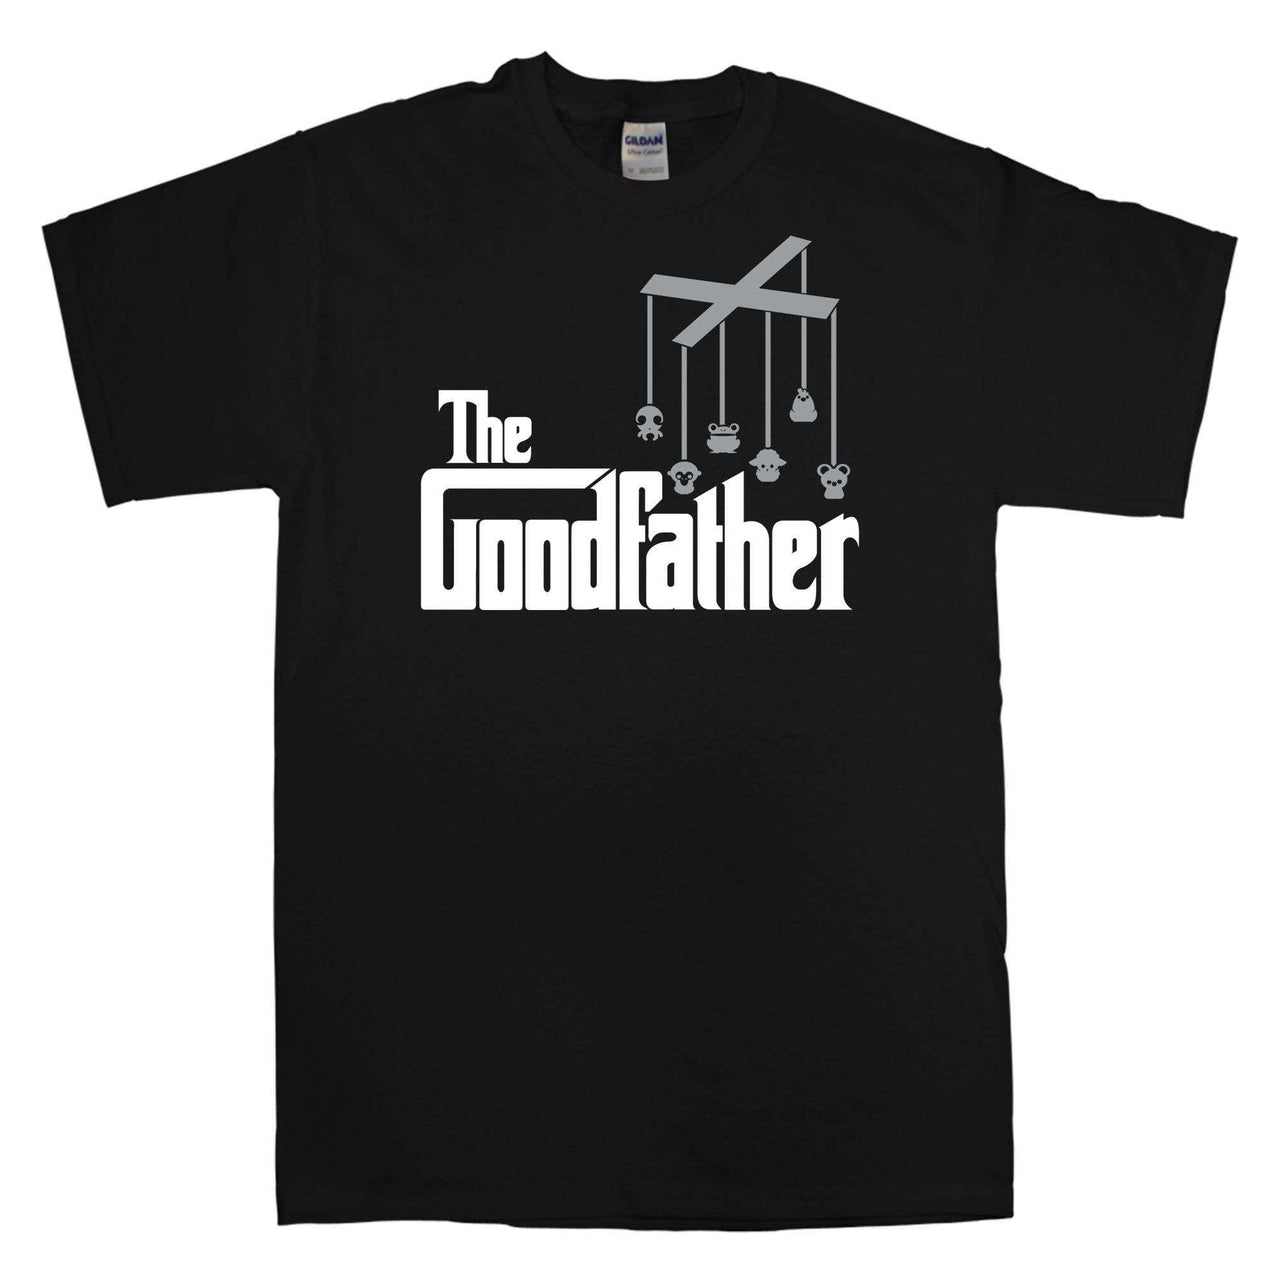 Funny The Goodfather Graphic T-Shirt For Men 8Ball